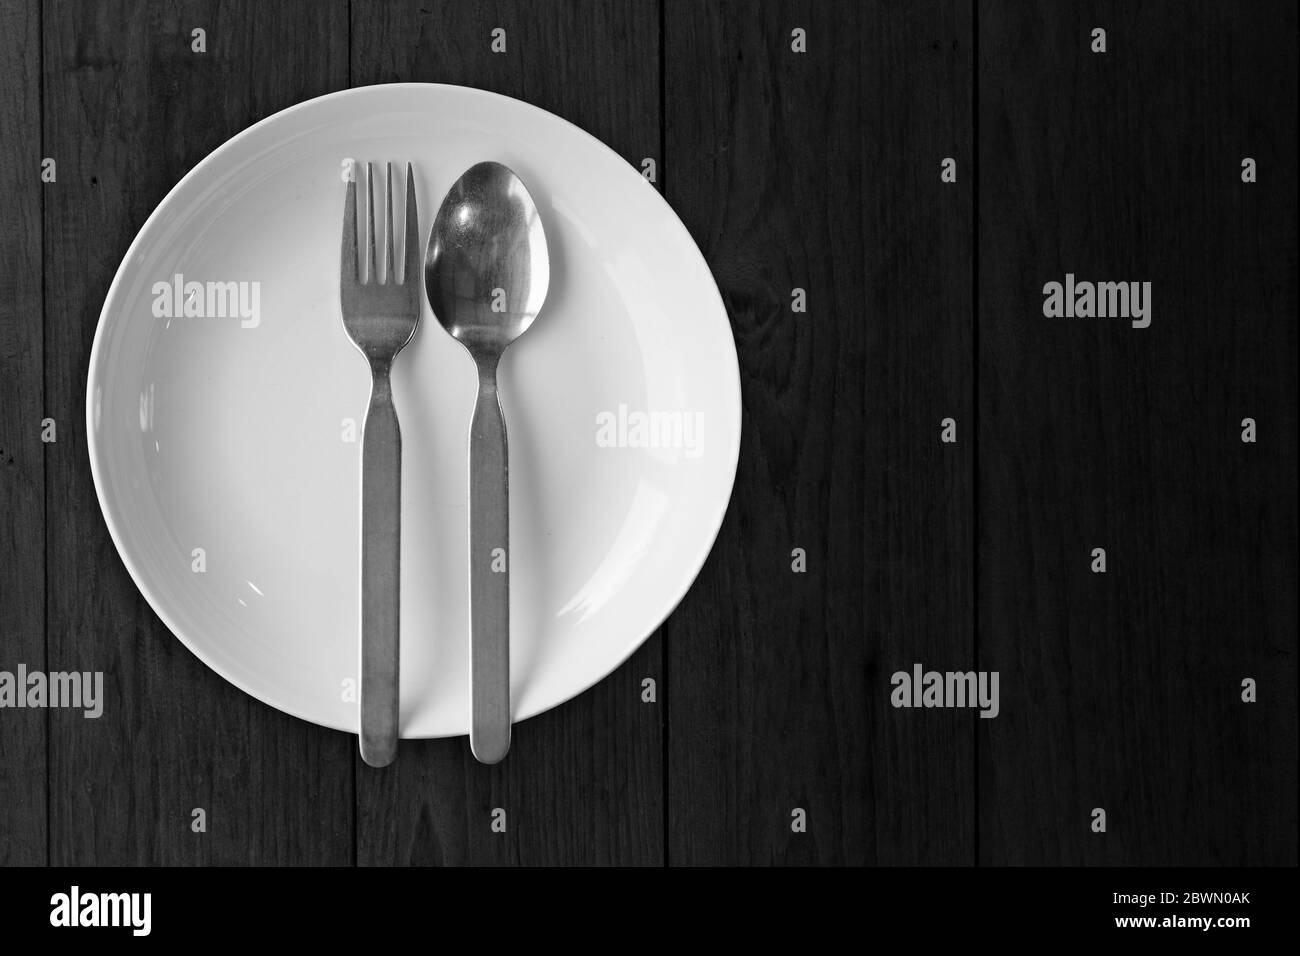 White dish plate with fork spoon on black wooden blank empty no food image for decoration. Stock Photo